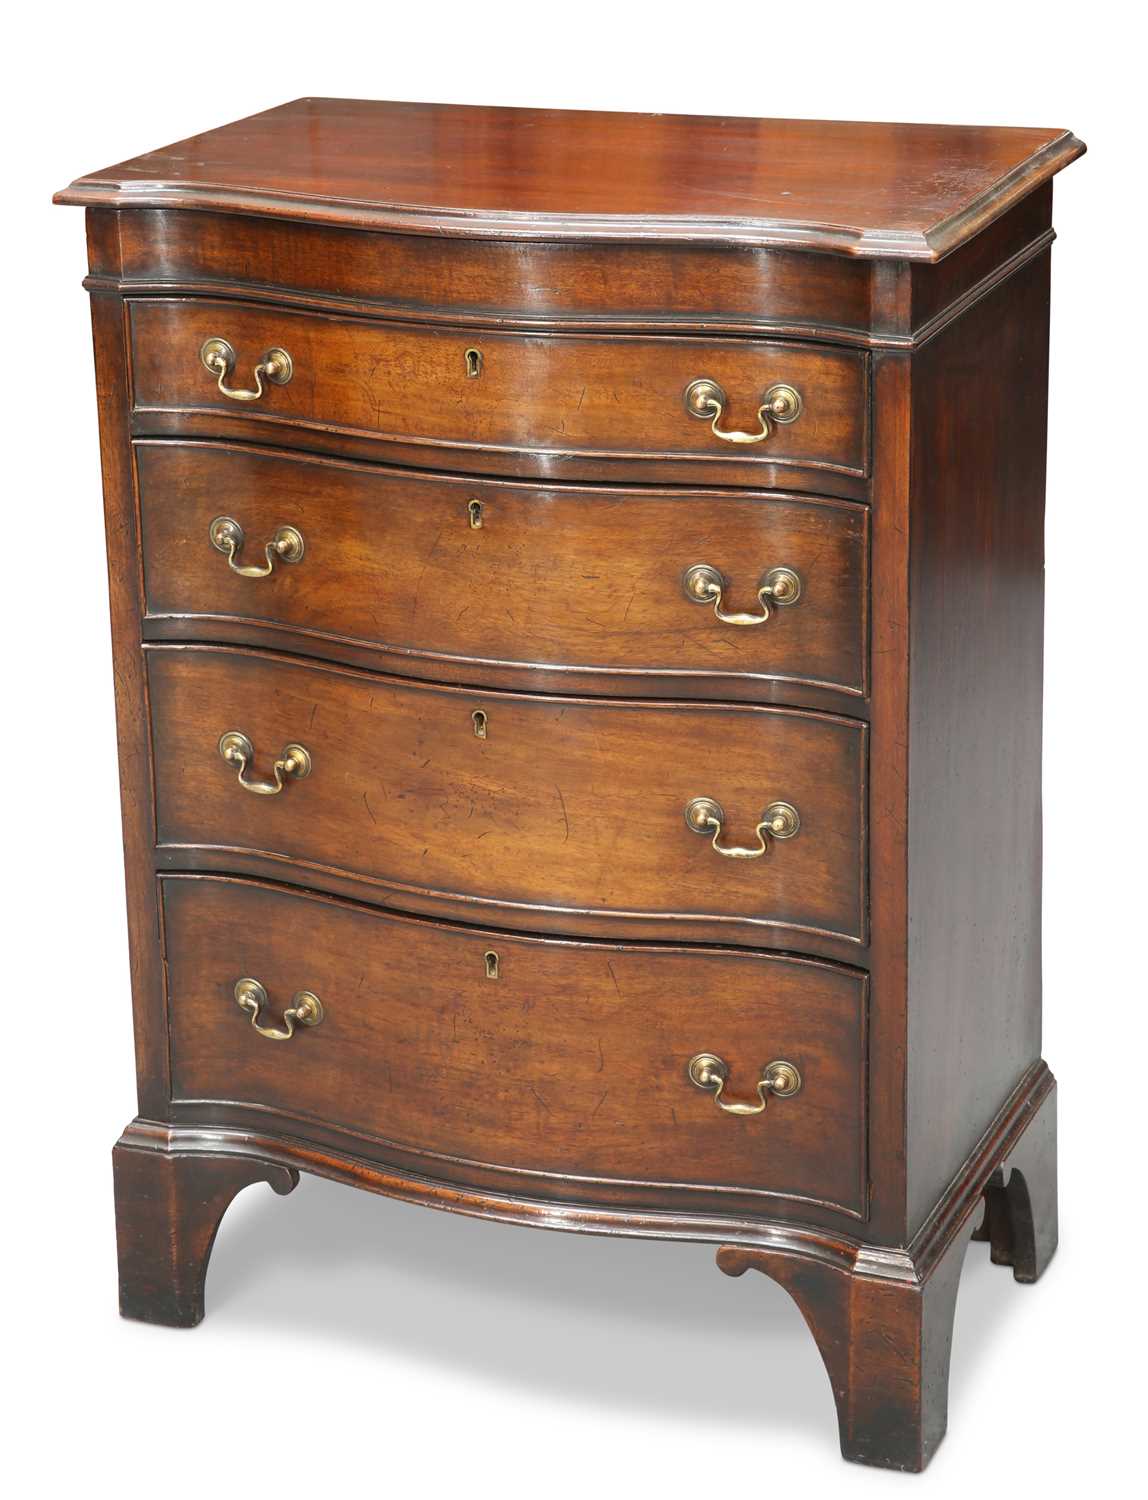 A GEORGE III STYLE MAHOGANY SERPENTINE BACHELOR’S CHEST, EARLY 20TH CENTURY, - Image 2 of 2